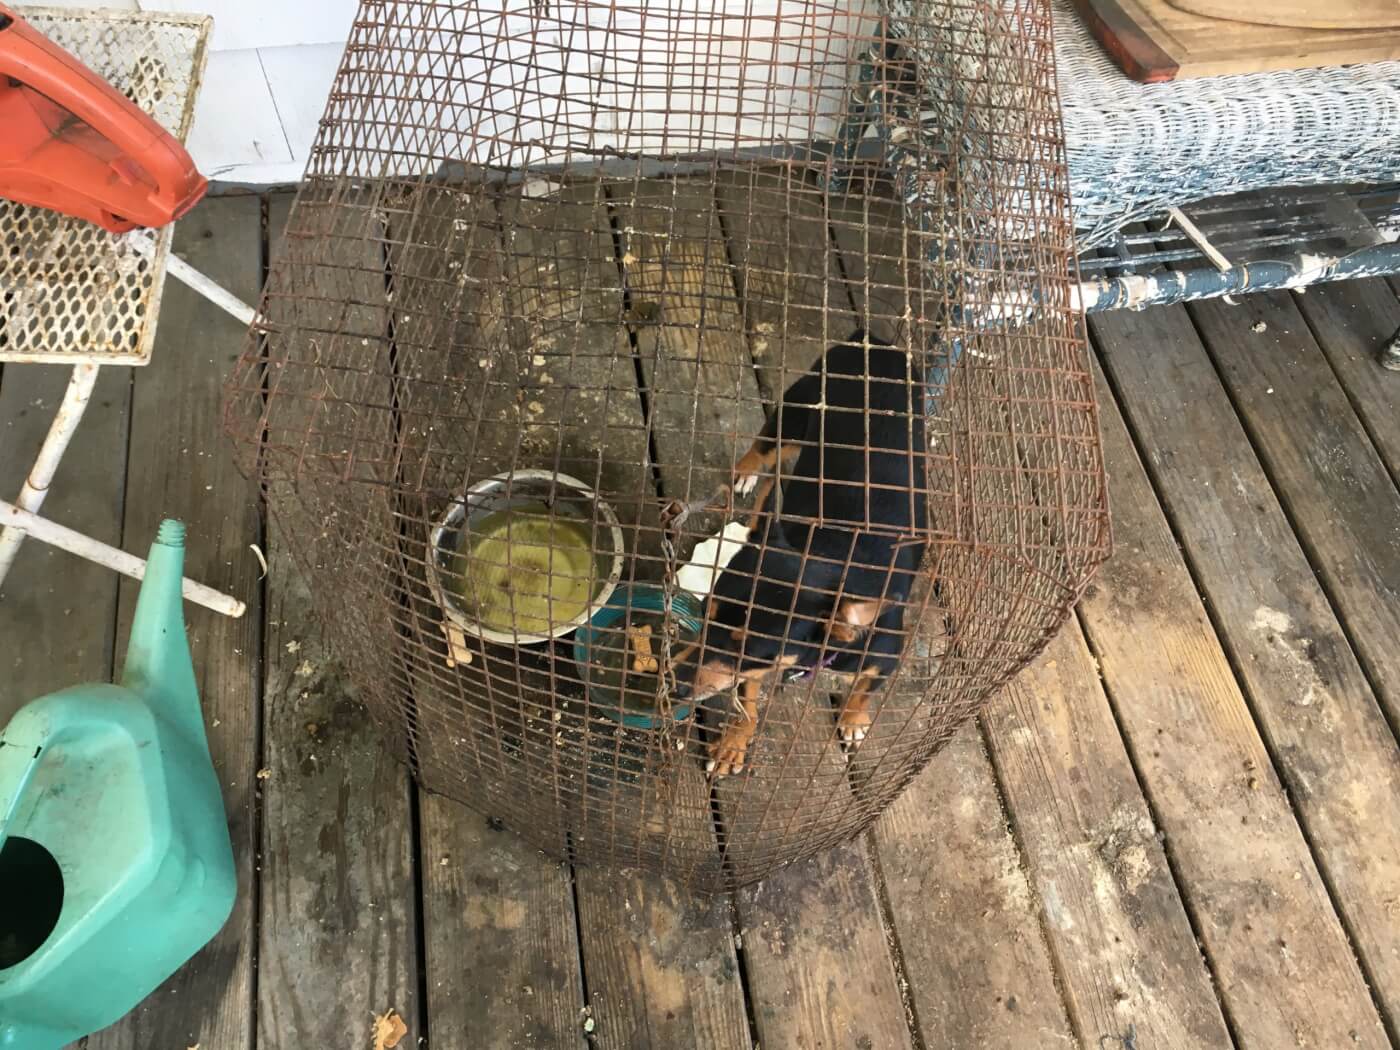 Apple Jack, a miniature Pinscher mix, in a rusty wire cage before being rescued